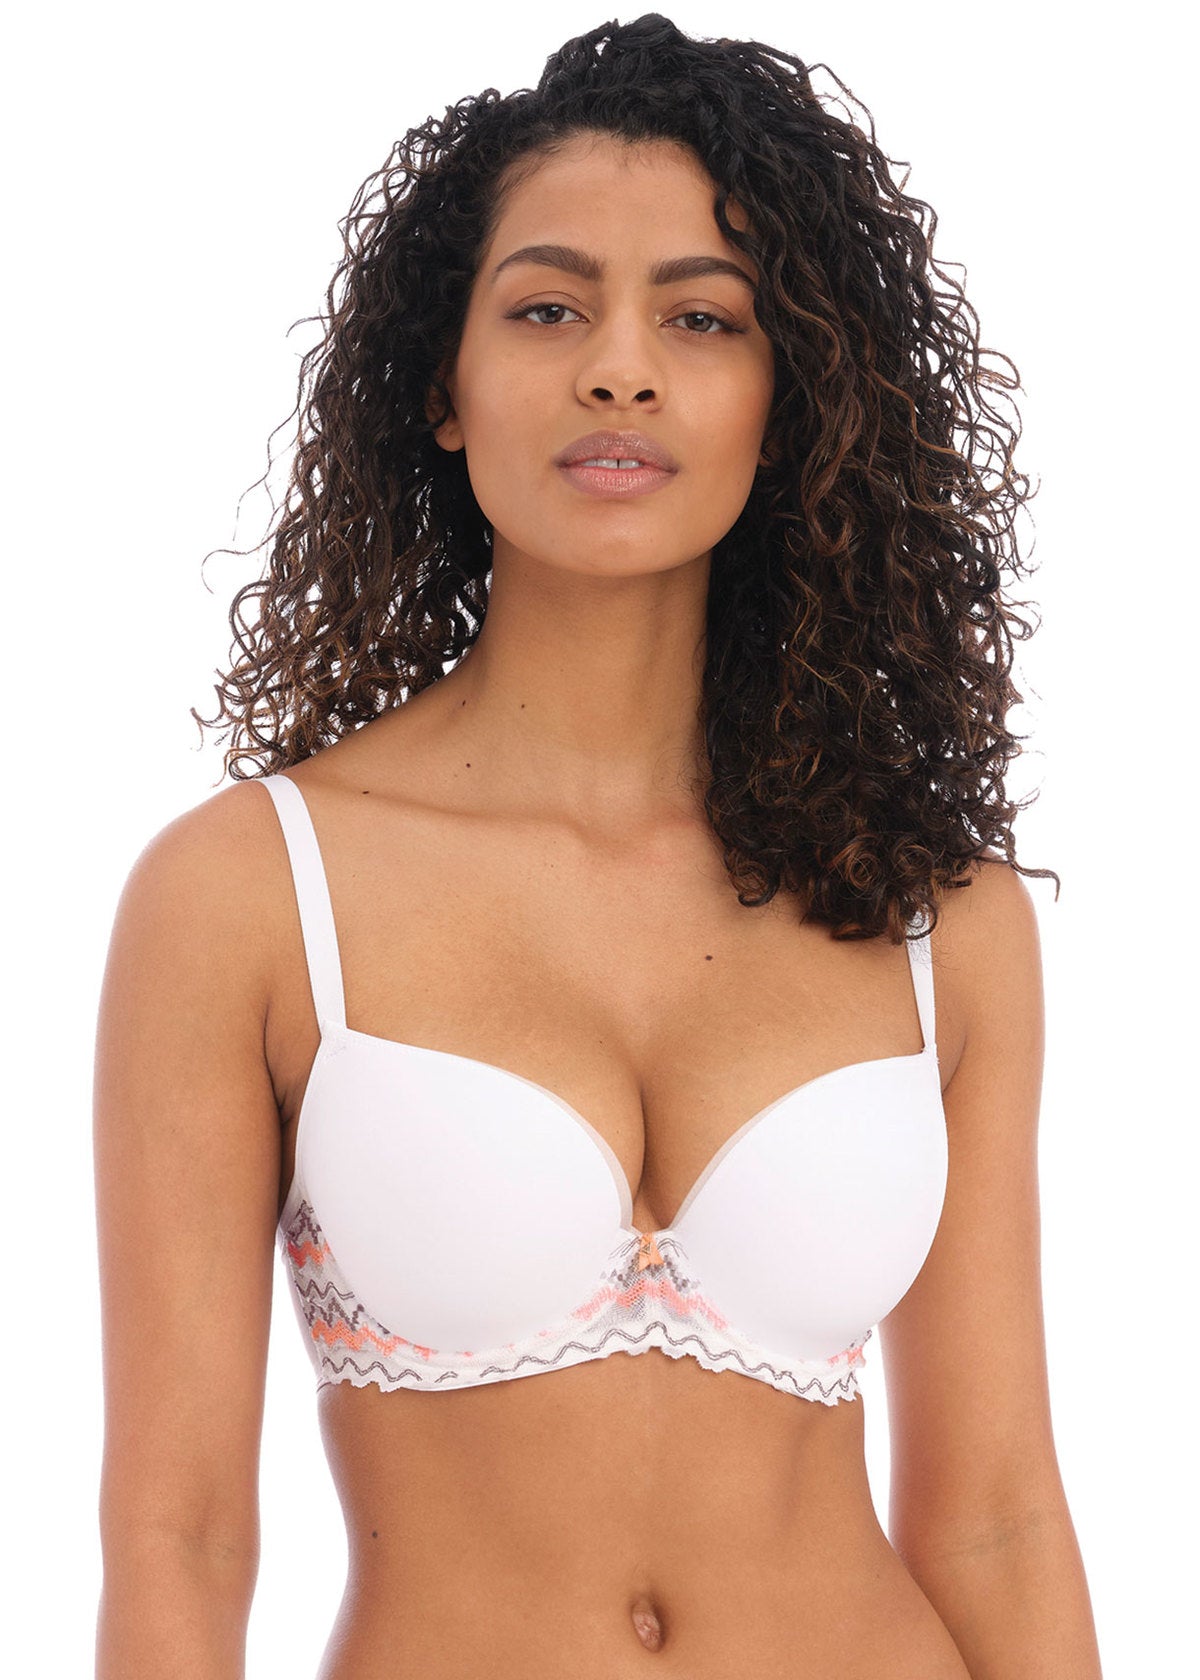 Festival Vibe Underwired Moulded Plunge T-Shirt Bra - White Coral